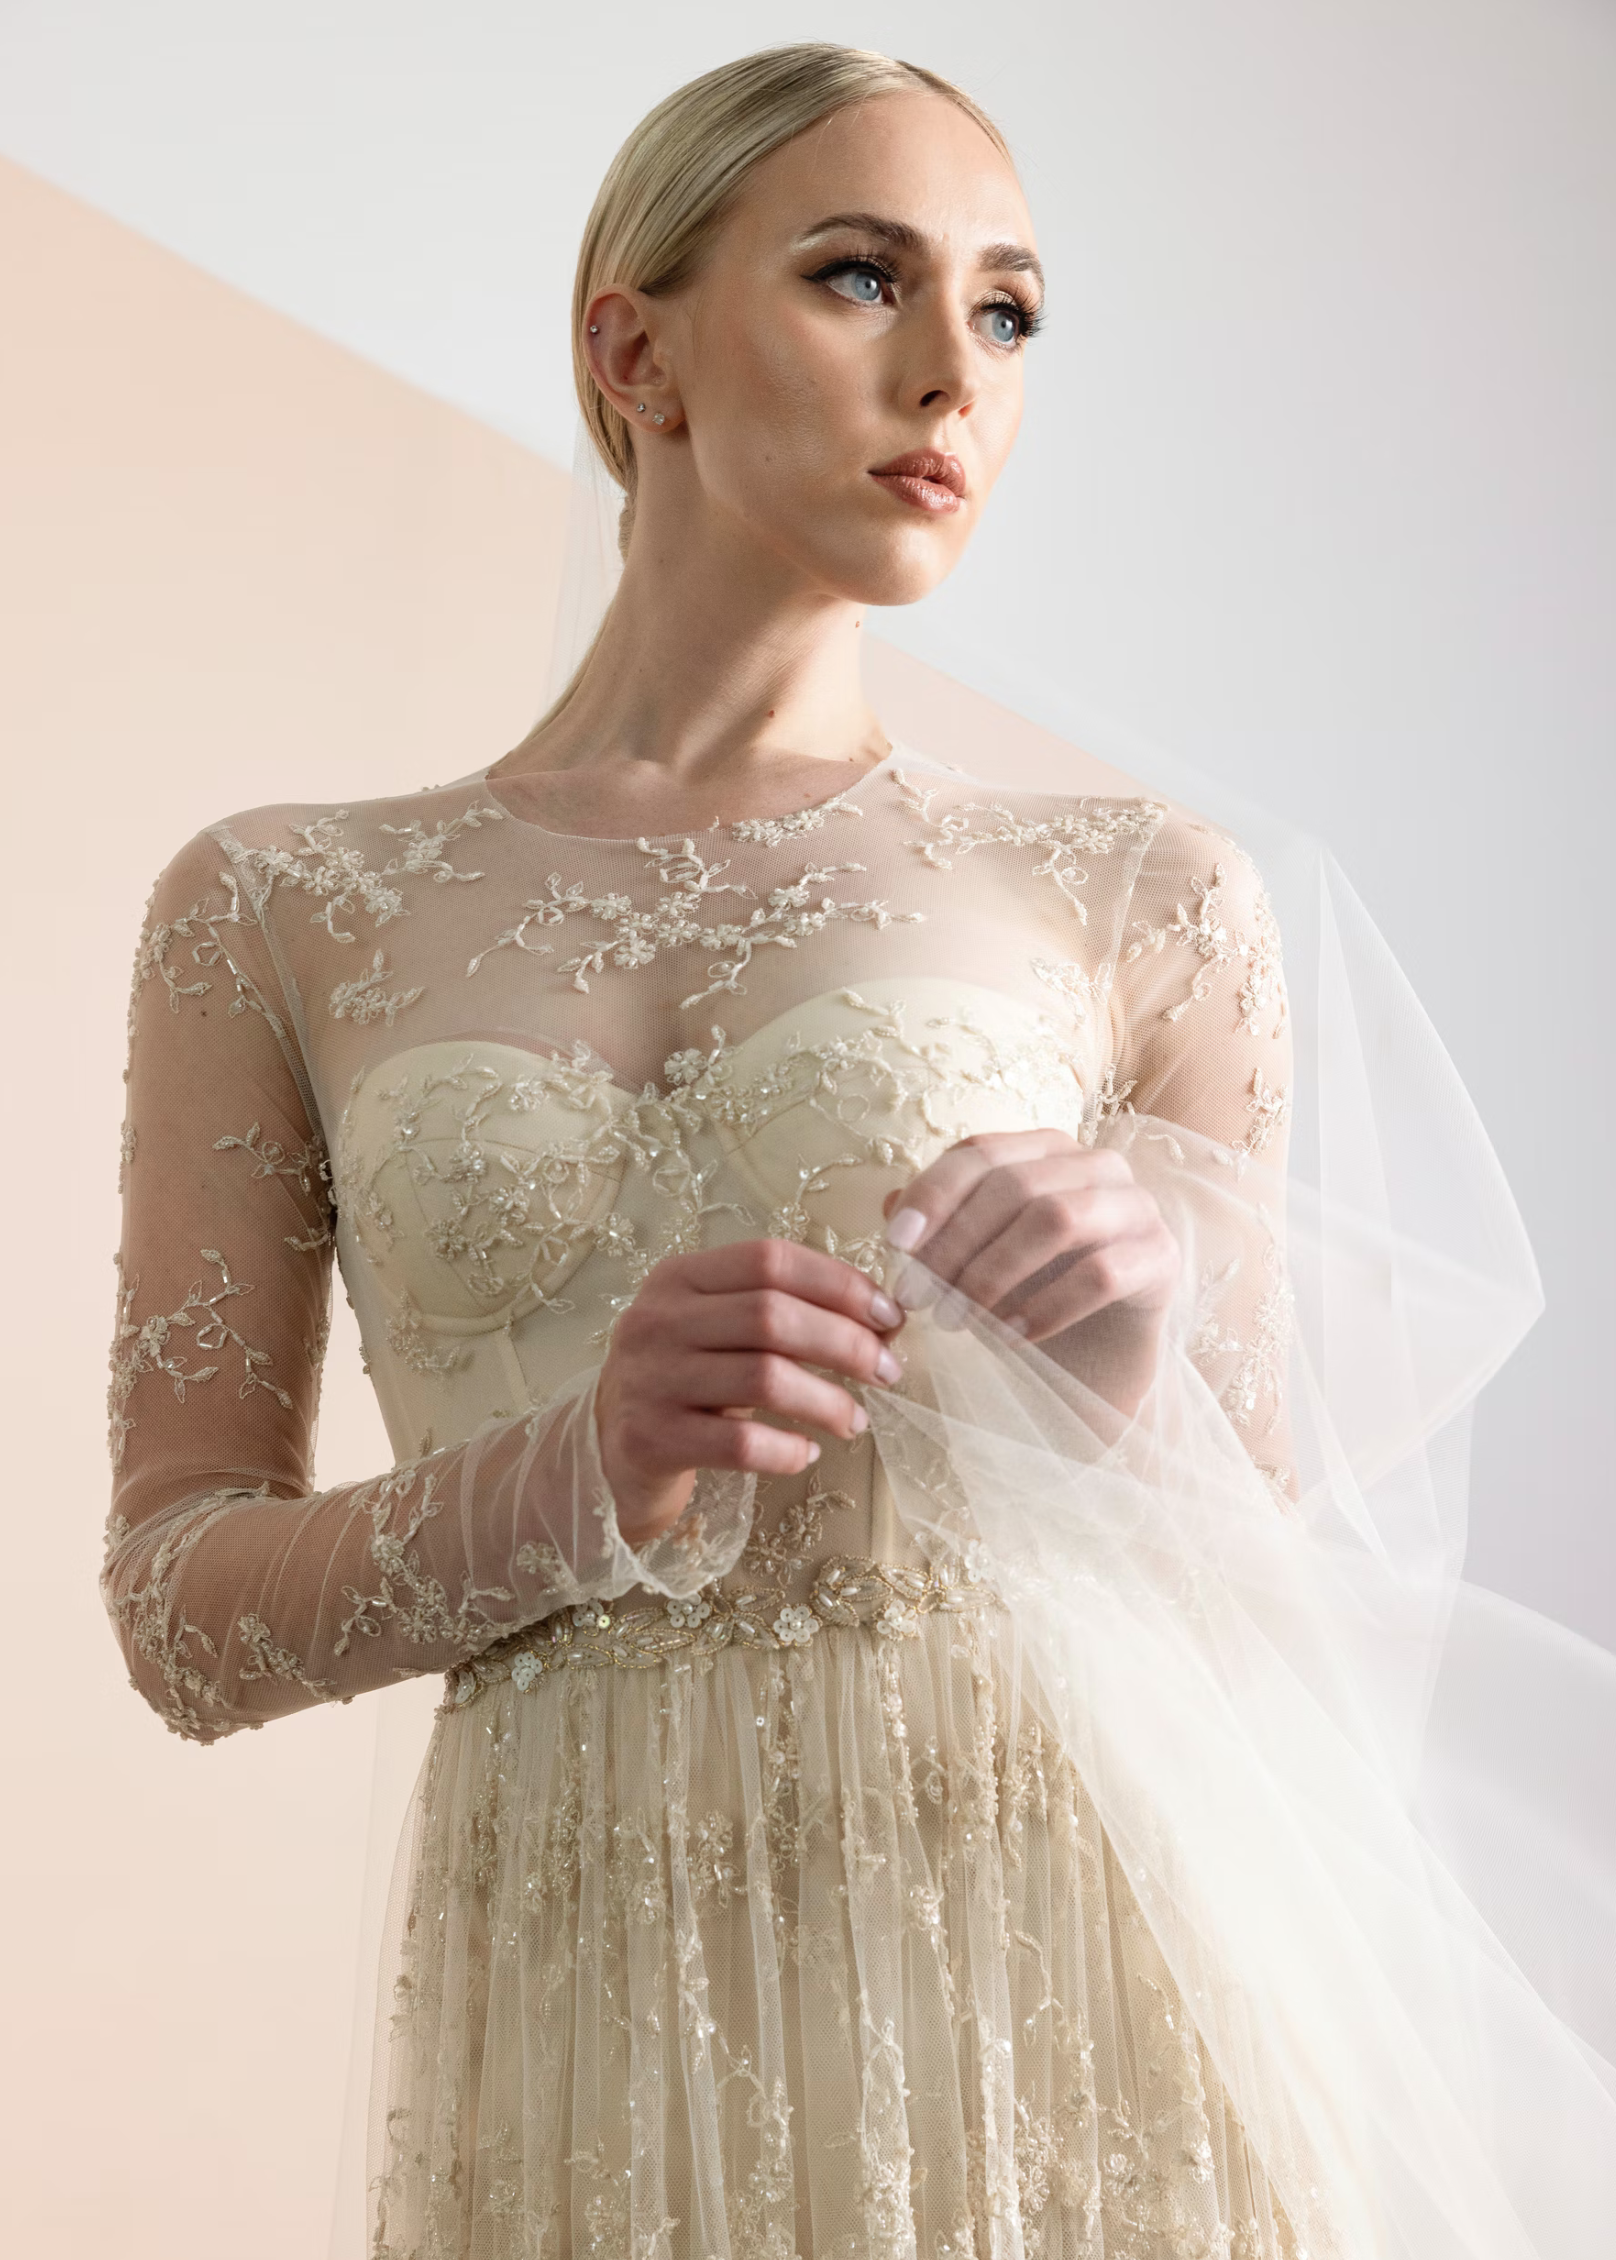 Romona Keveza gold wedding gown with sheer sleeves.